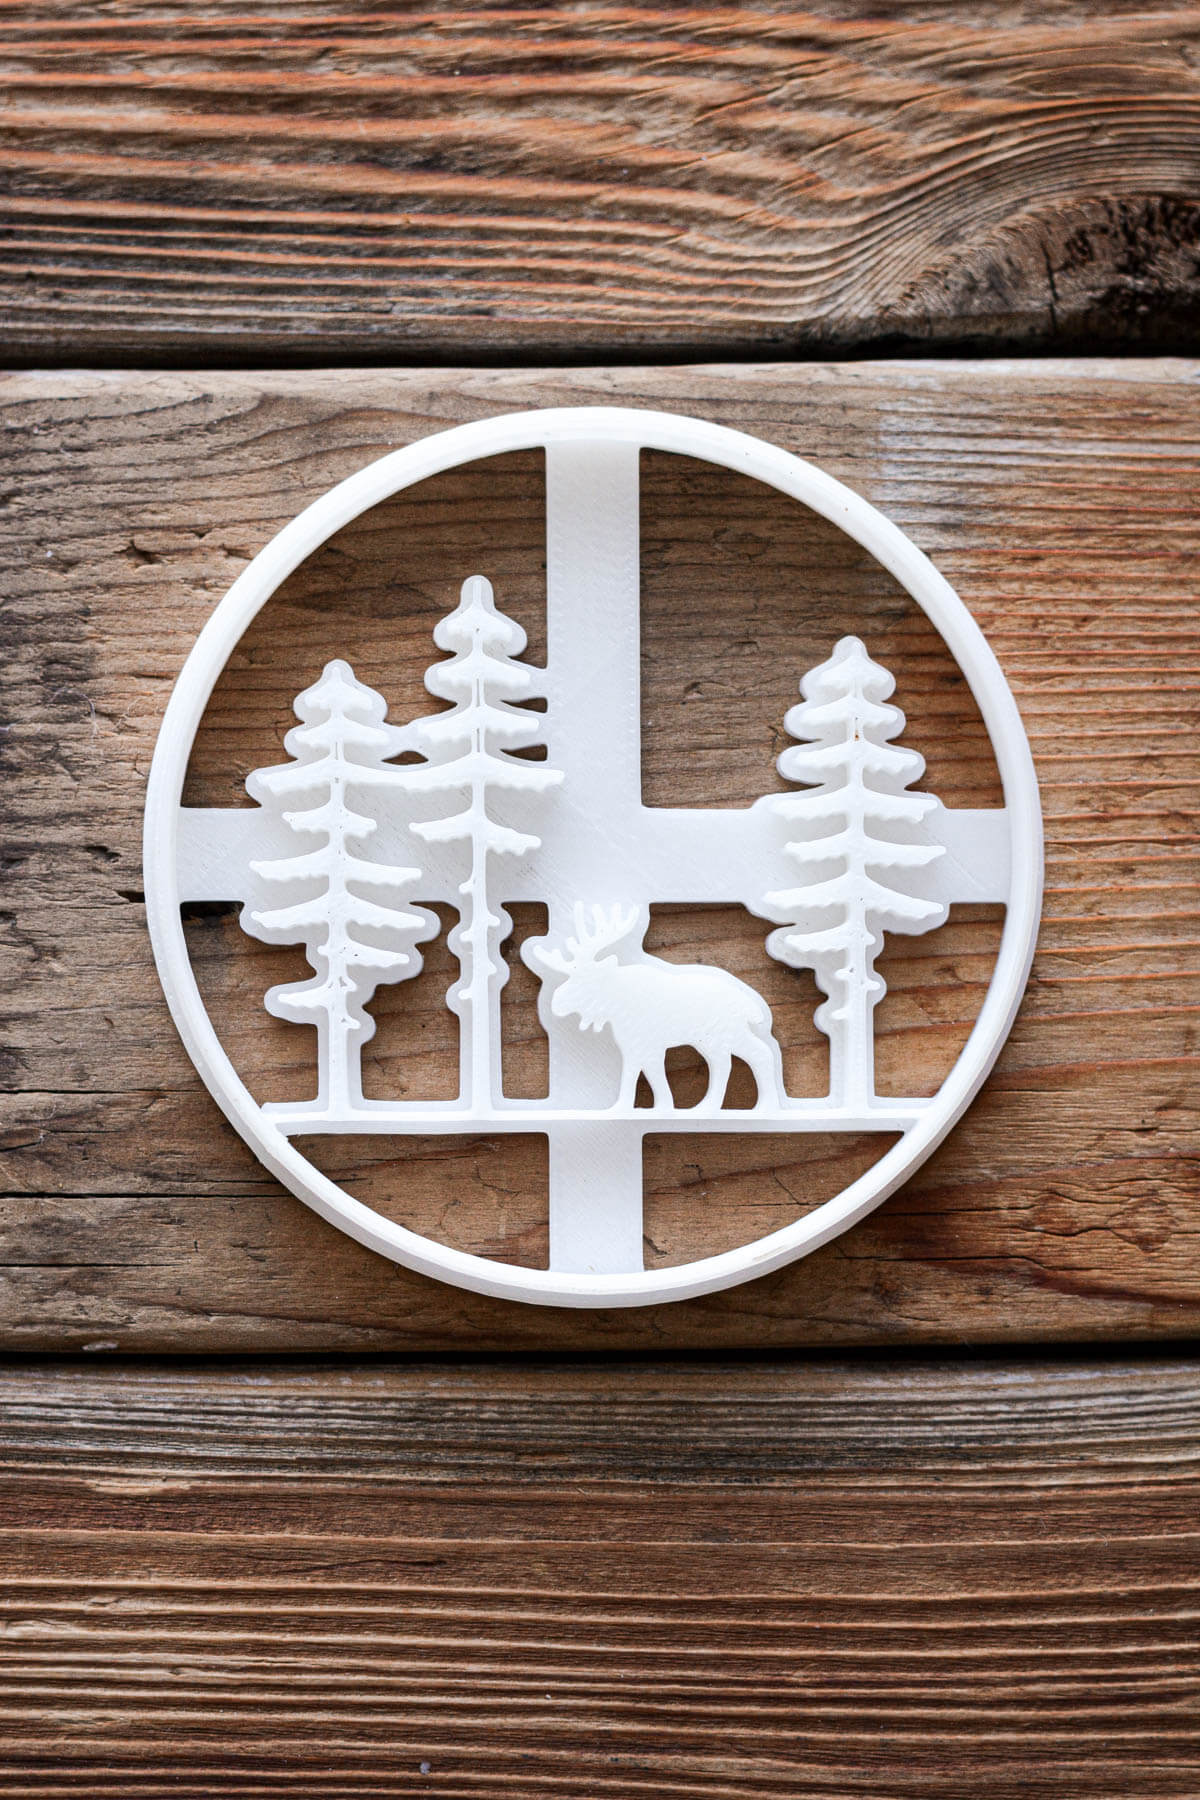 Cookie cutter with trees and moose stamps.